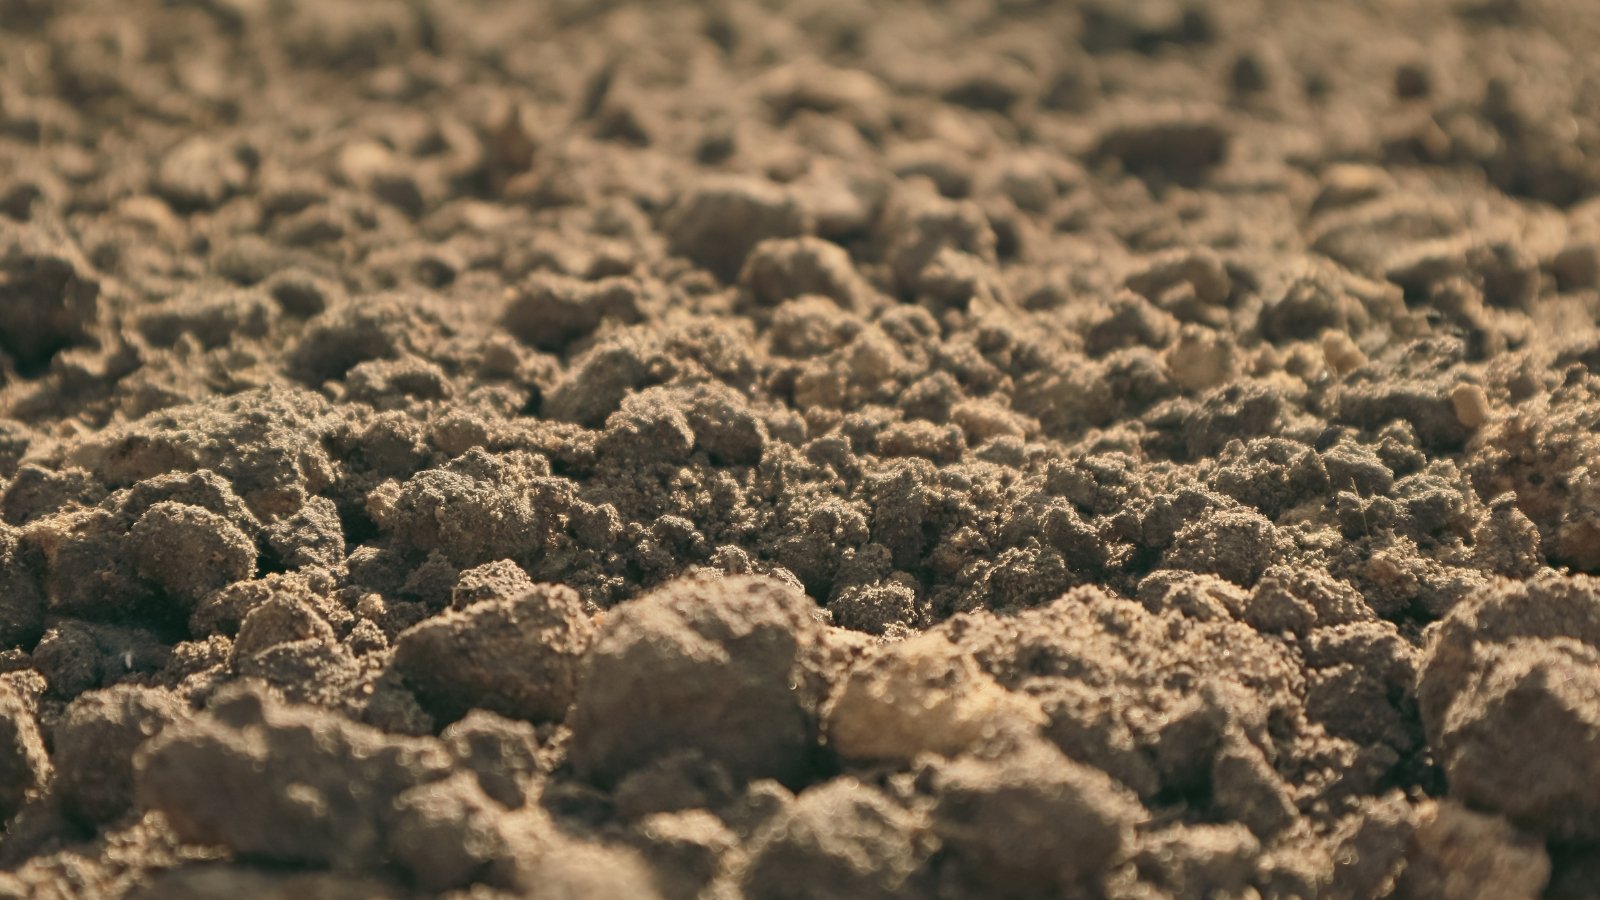 Close-up of soil with a crumbly, slightly clumpy texture and light brown color.